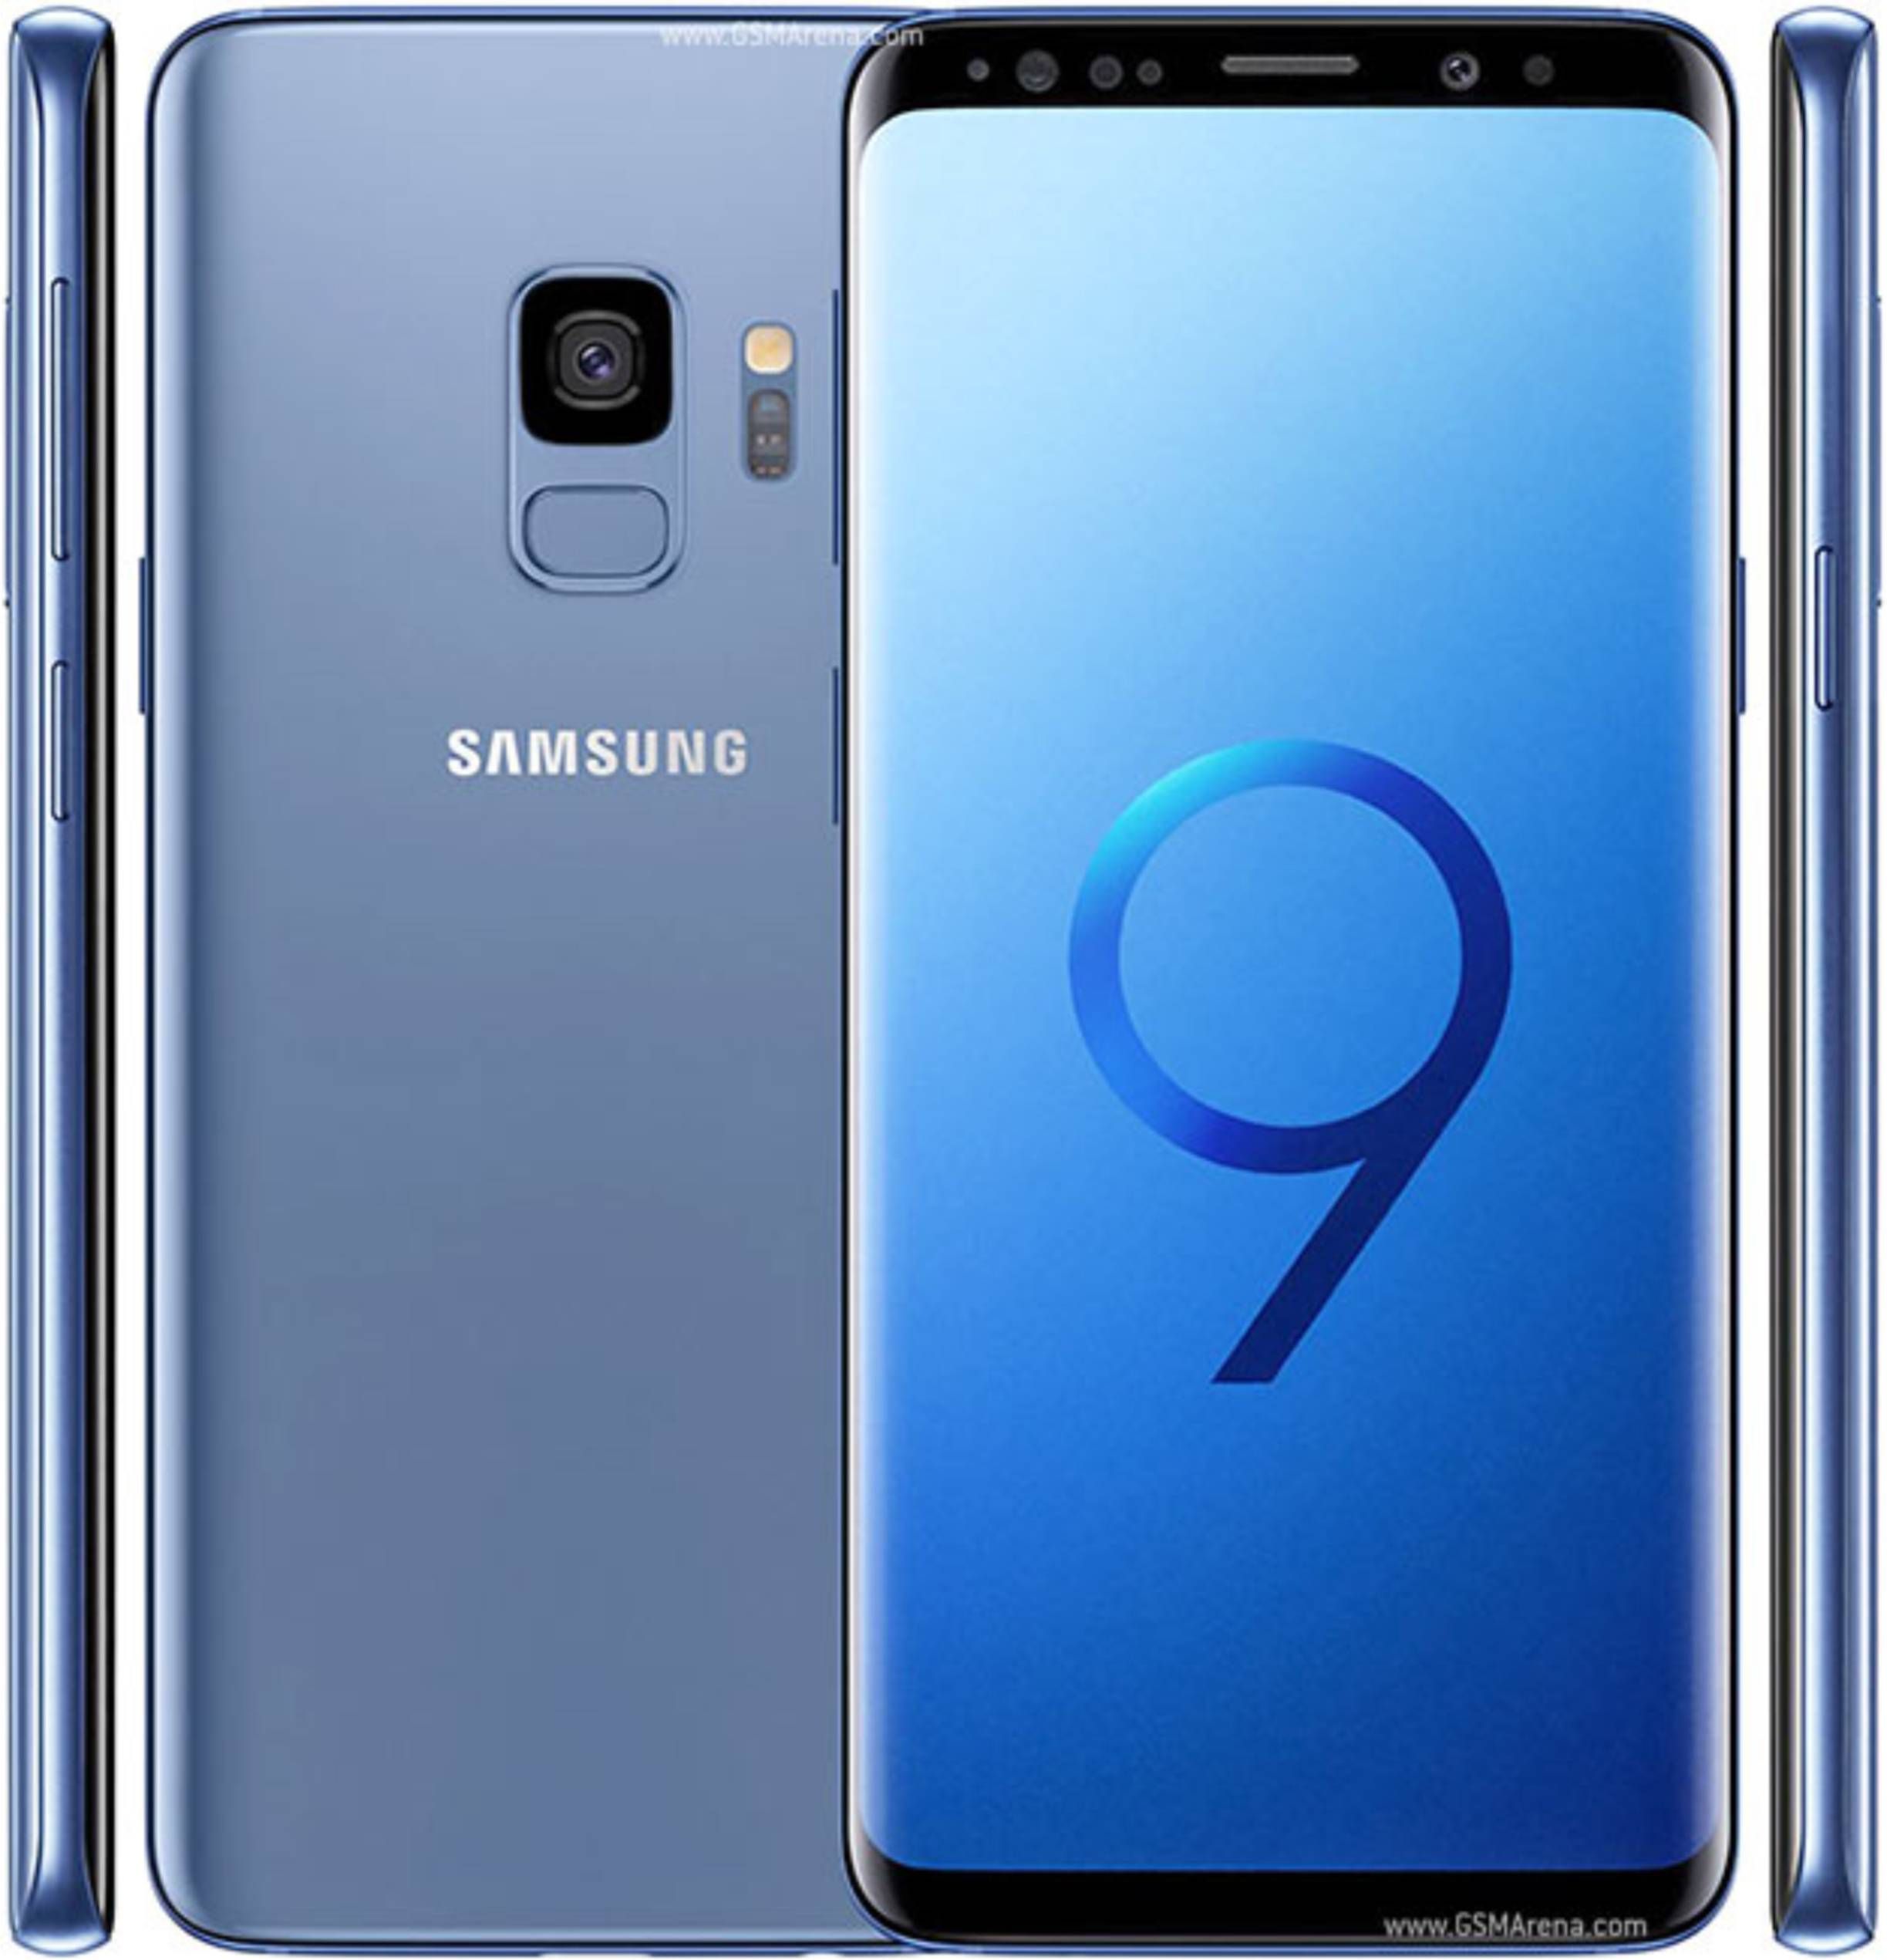 What is Samsung Galaxy S9 Screen Replacement Cost in Mombasa?